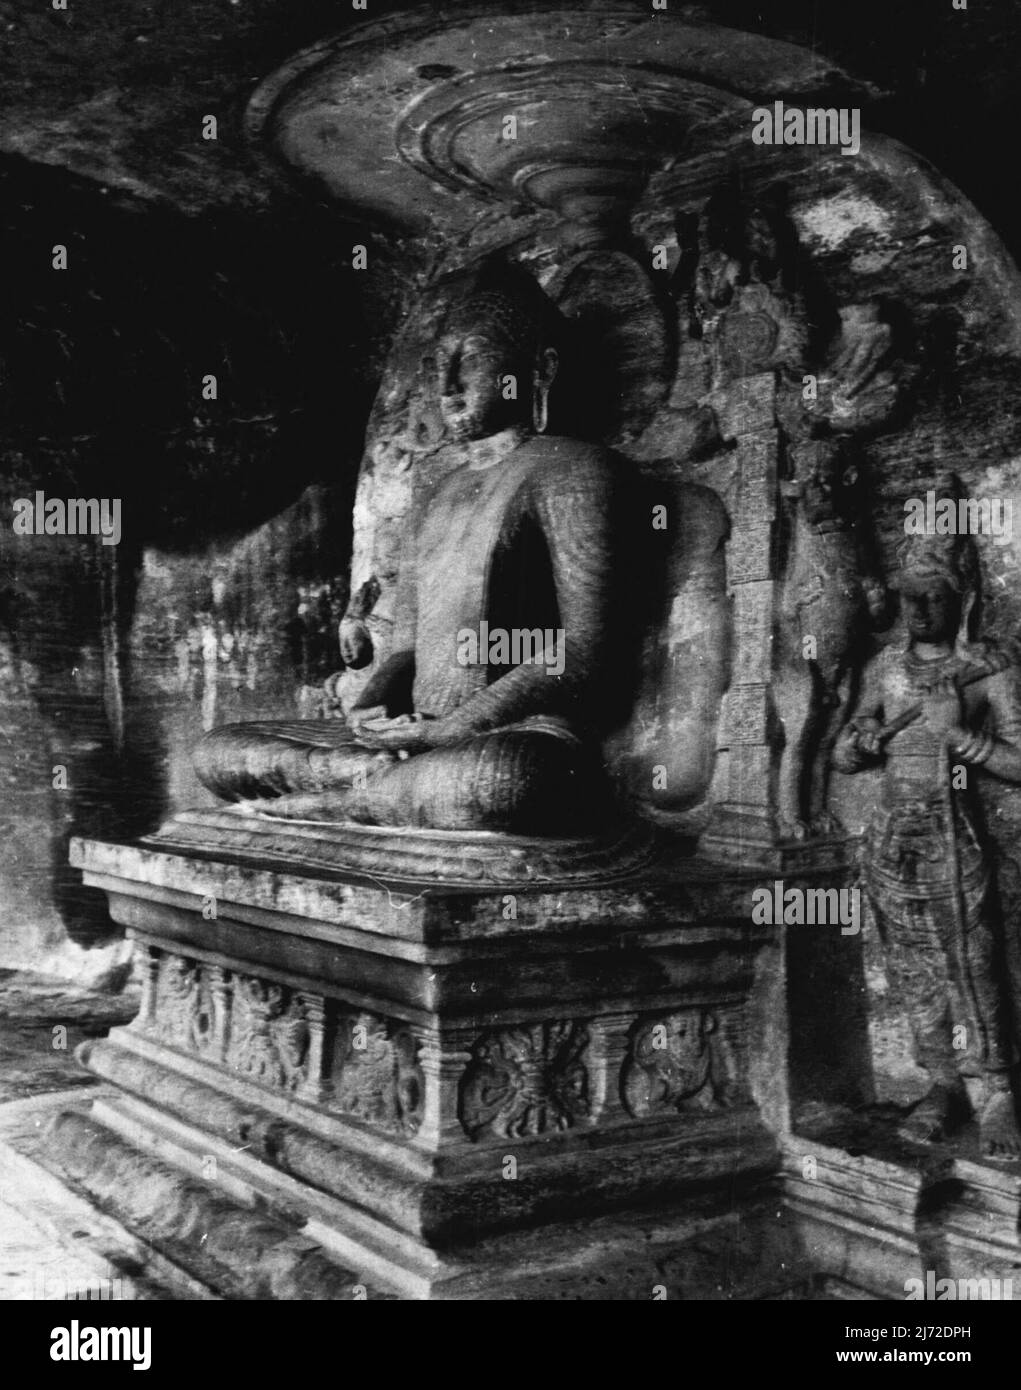 The Buried Cities' Of Ceylon - The rock-temple (Gal-vihara), 'the cave of the spirits of knowledge' is hewn out of a solid granite face, and in it broods a Buddha seated on a carved pedestal. The rock background is decorated with figures of Hindu gods, who played a considerable part in the religion of the Sinhalese Buddhists. July 18, 1942. (Photo by Paul Popper). Stock Photo